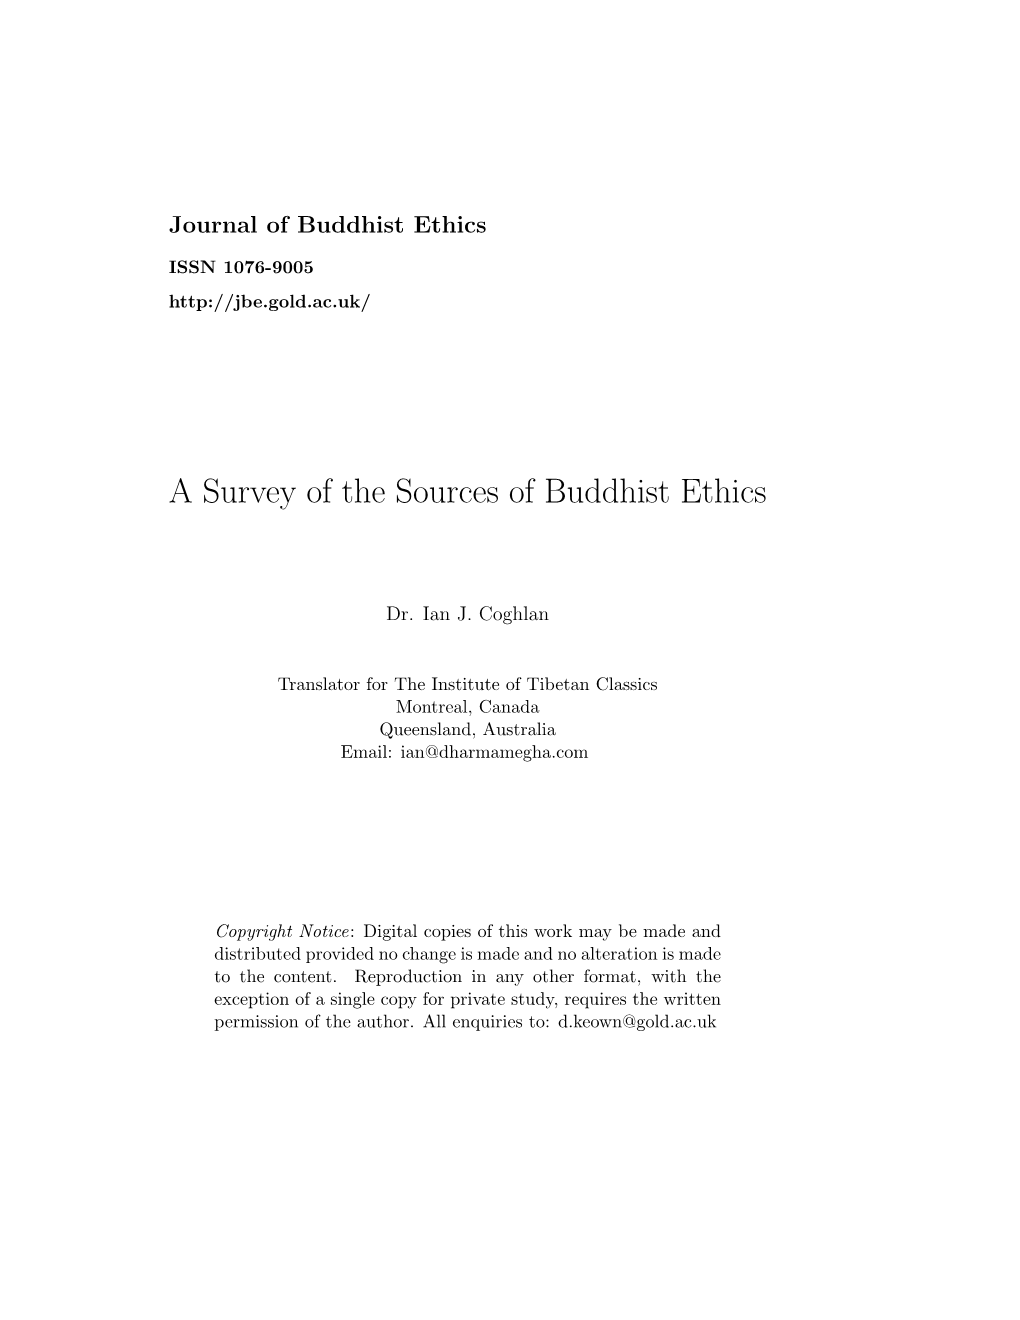 A Survey of the Sources of Buddhist Ethics